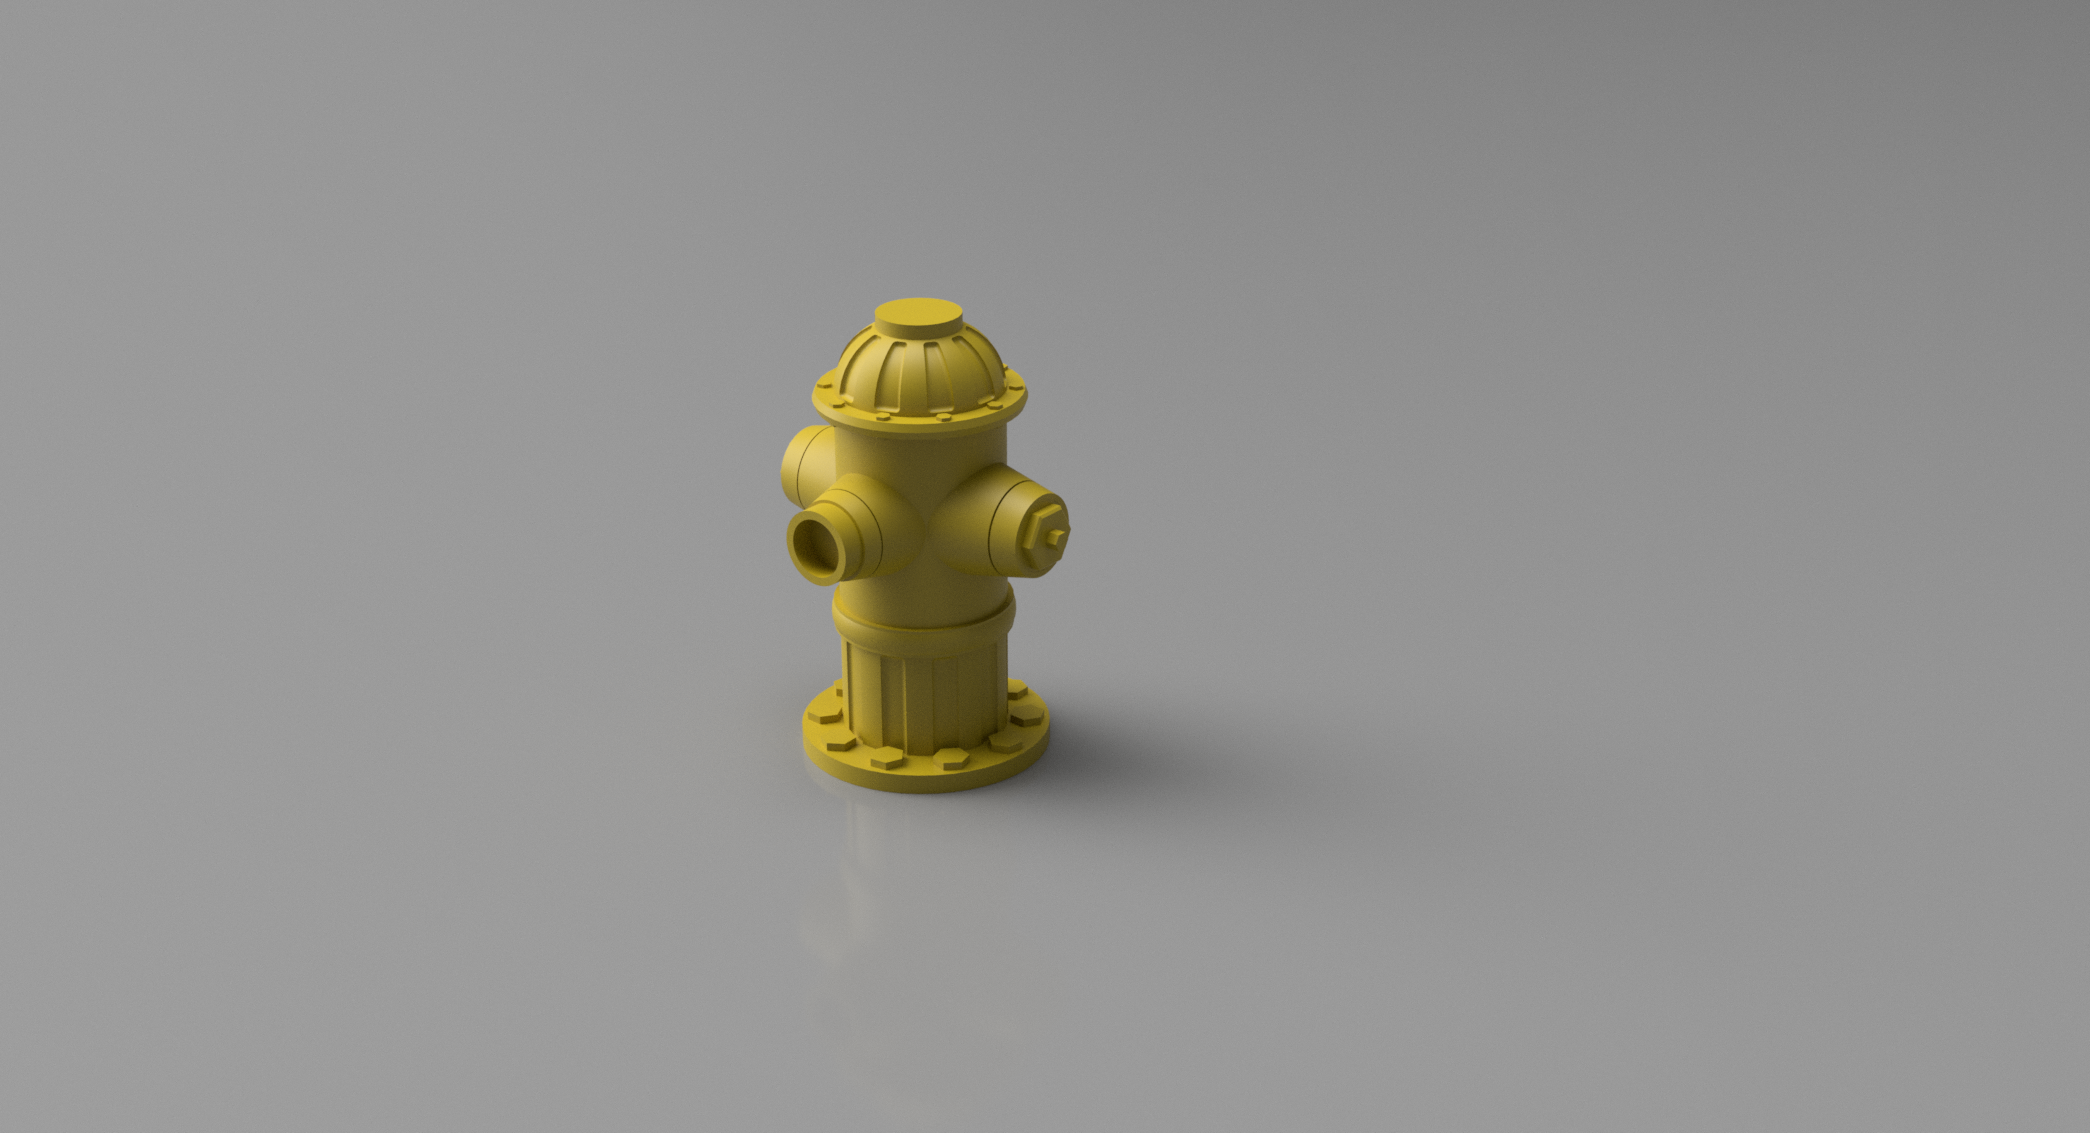 FireHydrant v1.png Download STL file Fire Hydrant model prop for Dioramas and Tabletop • 3D printable design, The3Dprinting